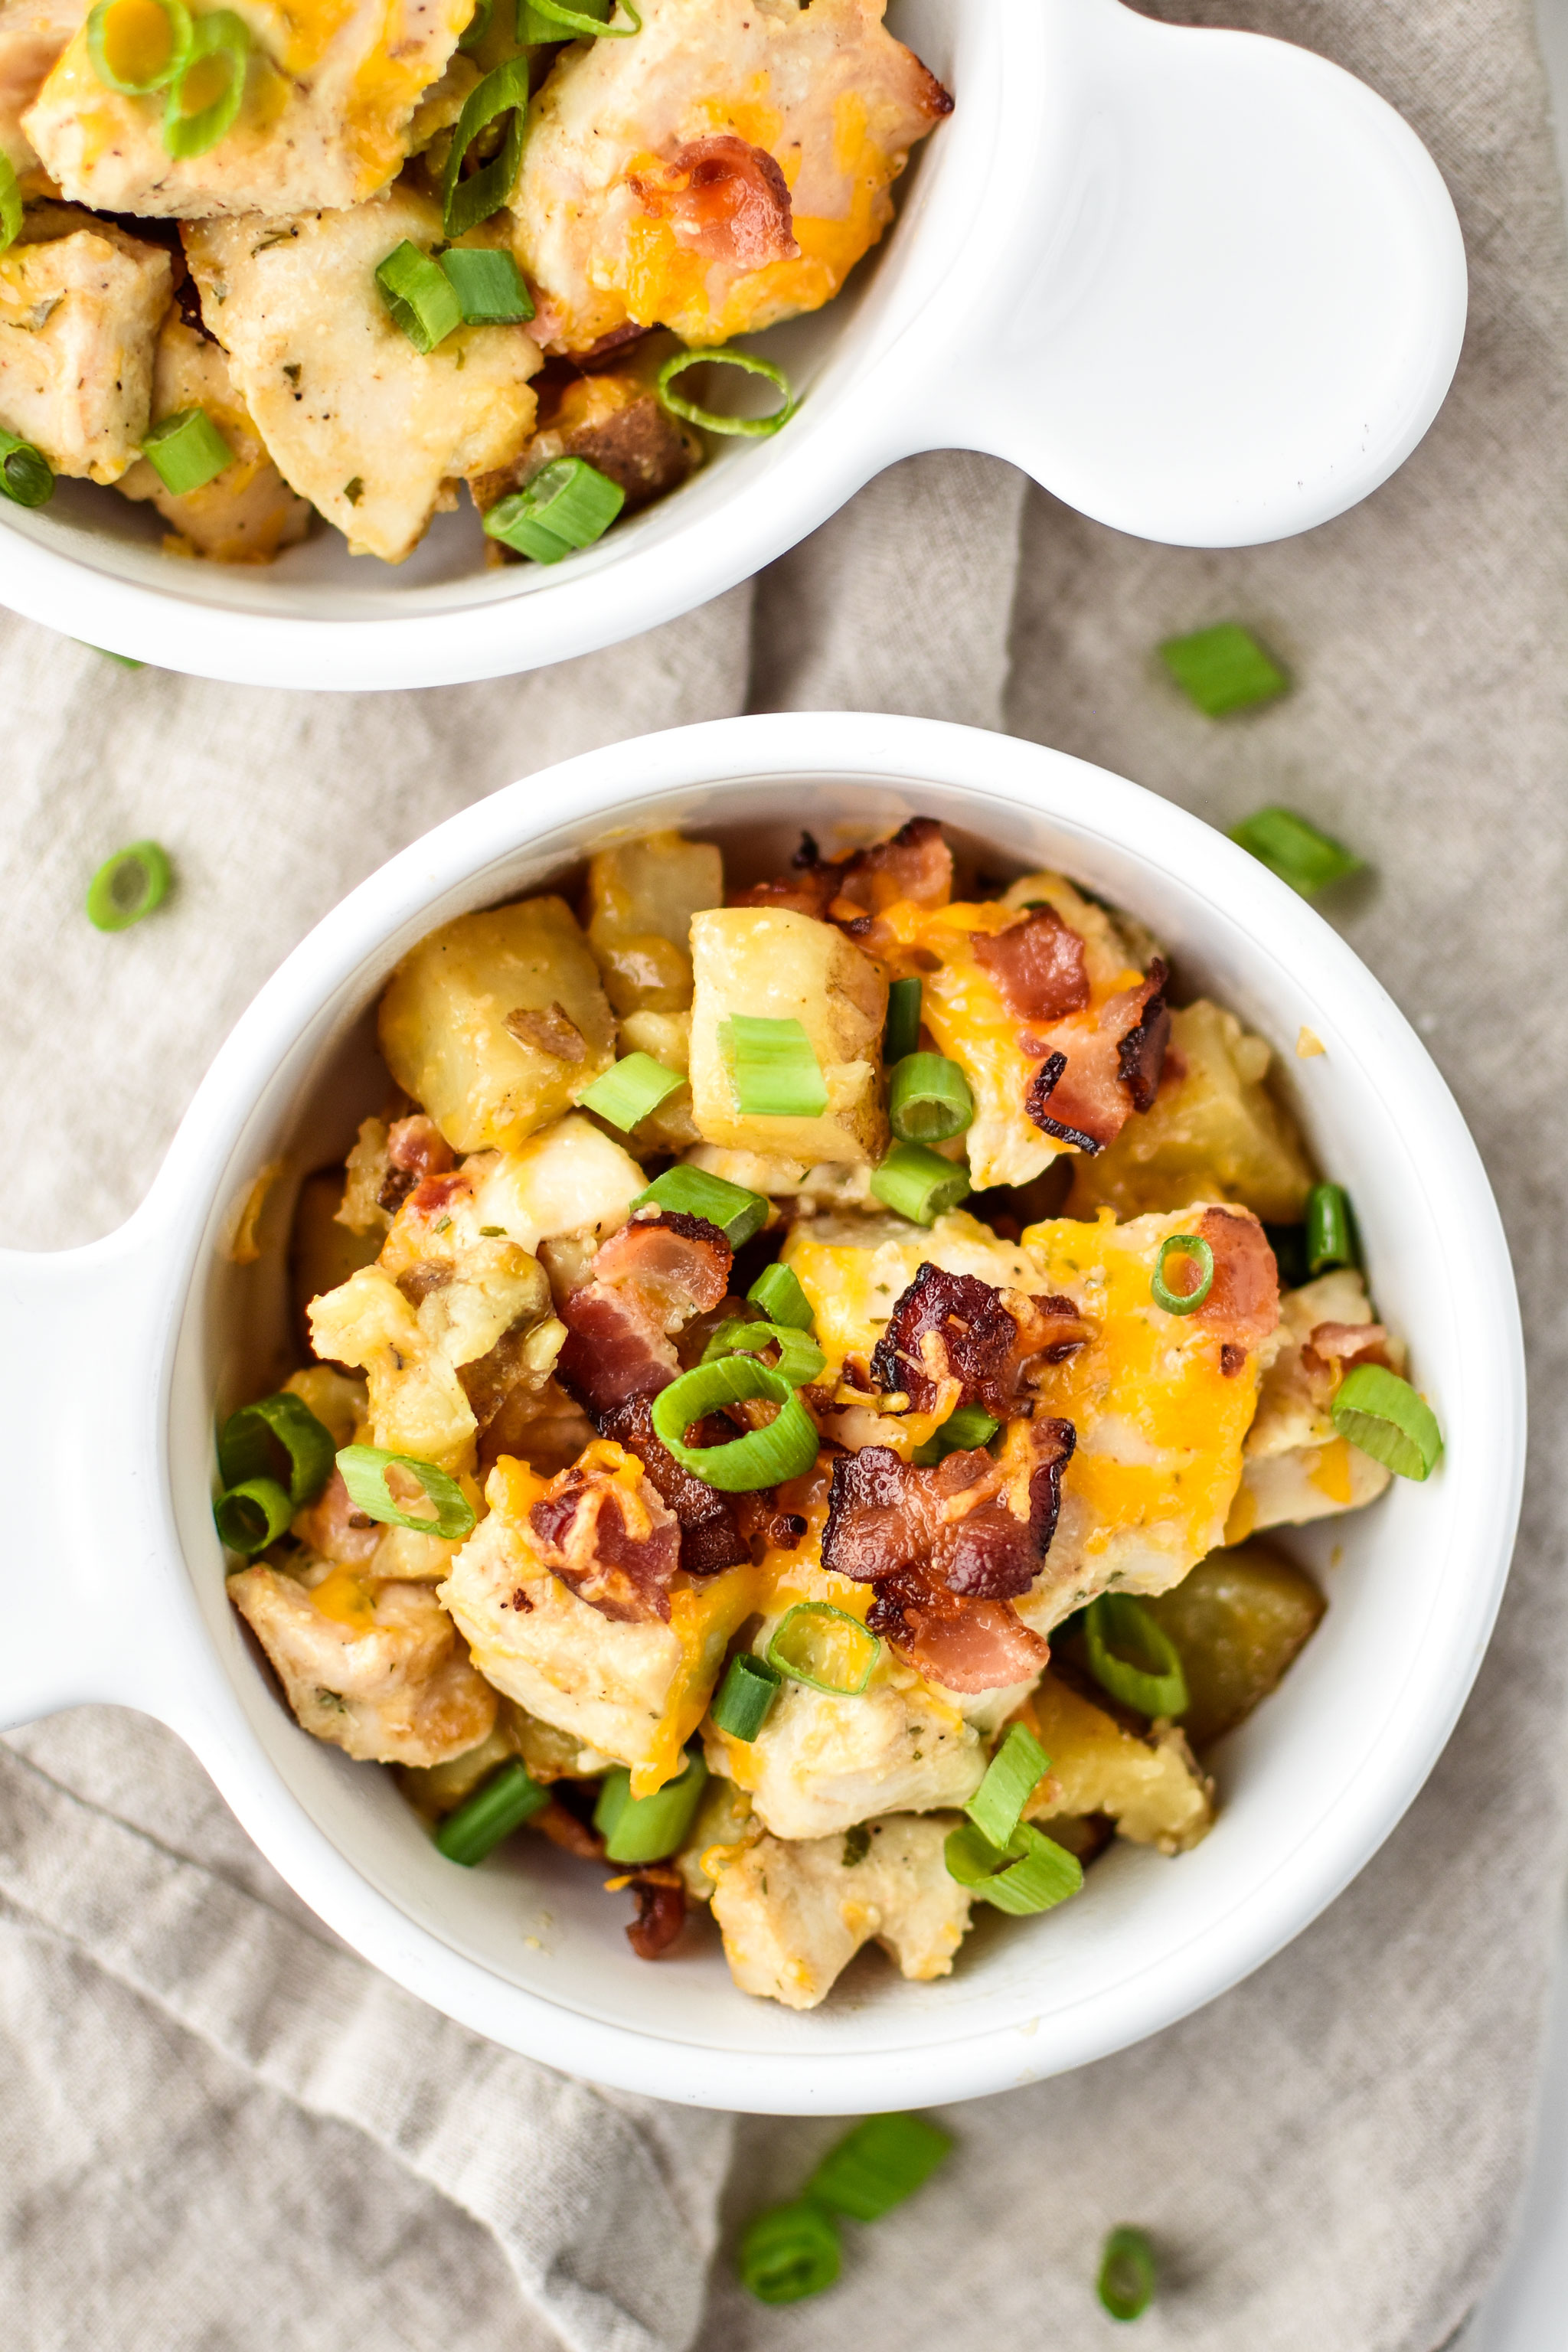 Chicken bacon ranch potato bake dished up in bowls